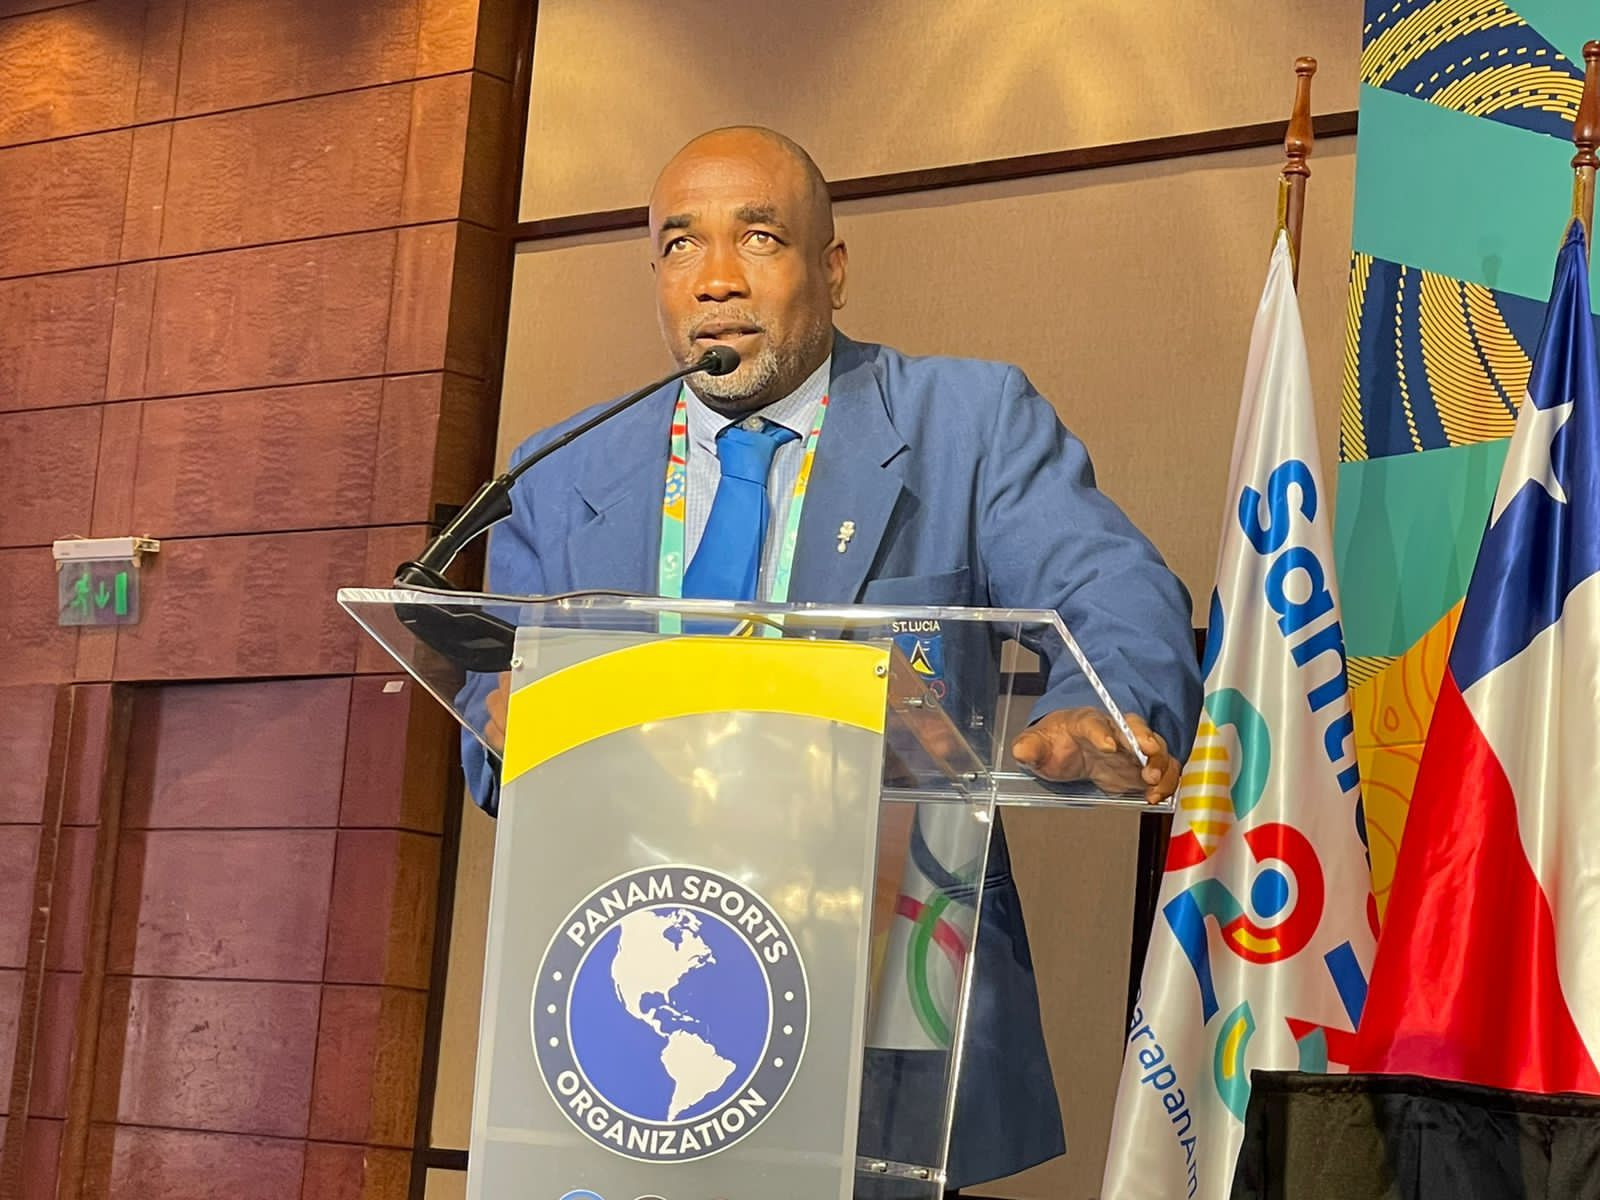 St Lucia Olympic Committee President Alfred Emmanuel criticised ANOC at the Panam Sports General Assembly ©Panam Sports